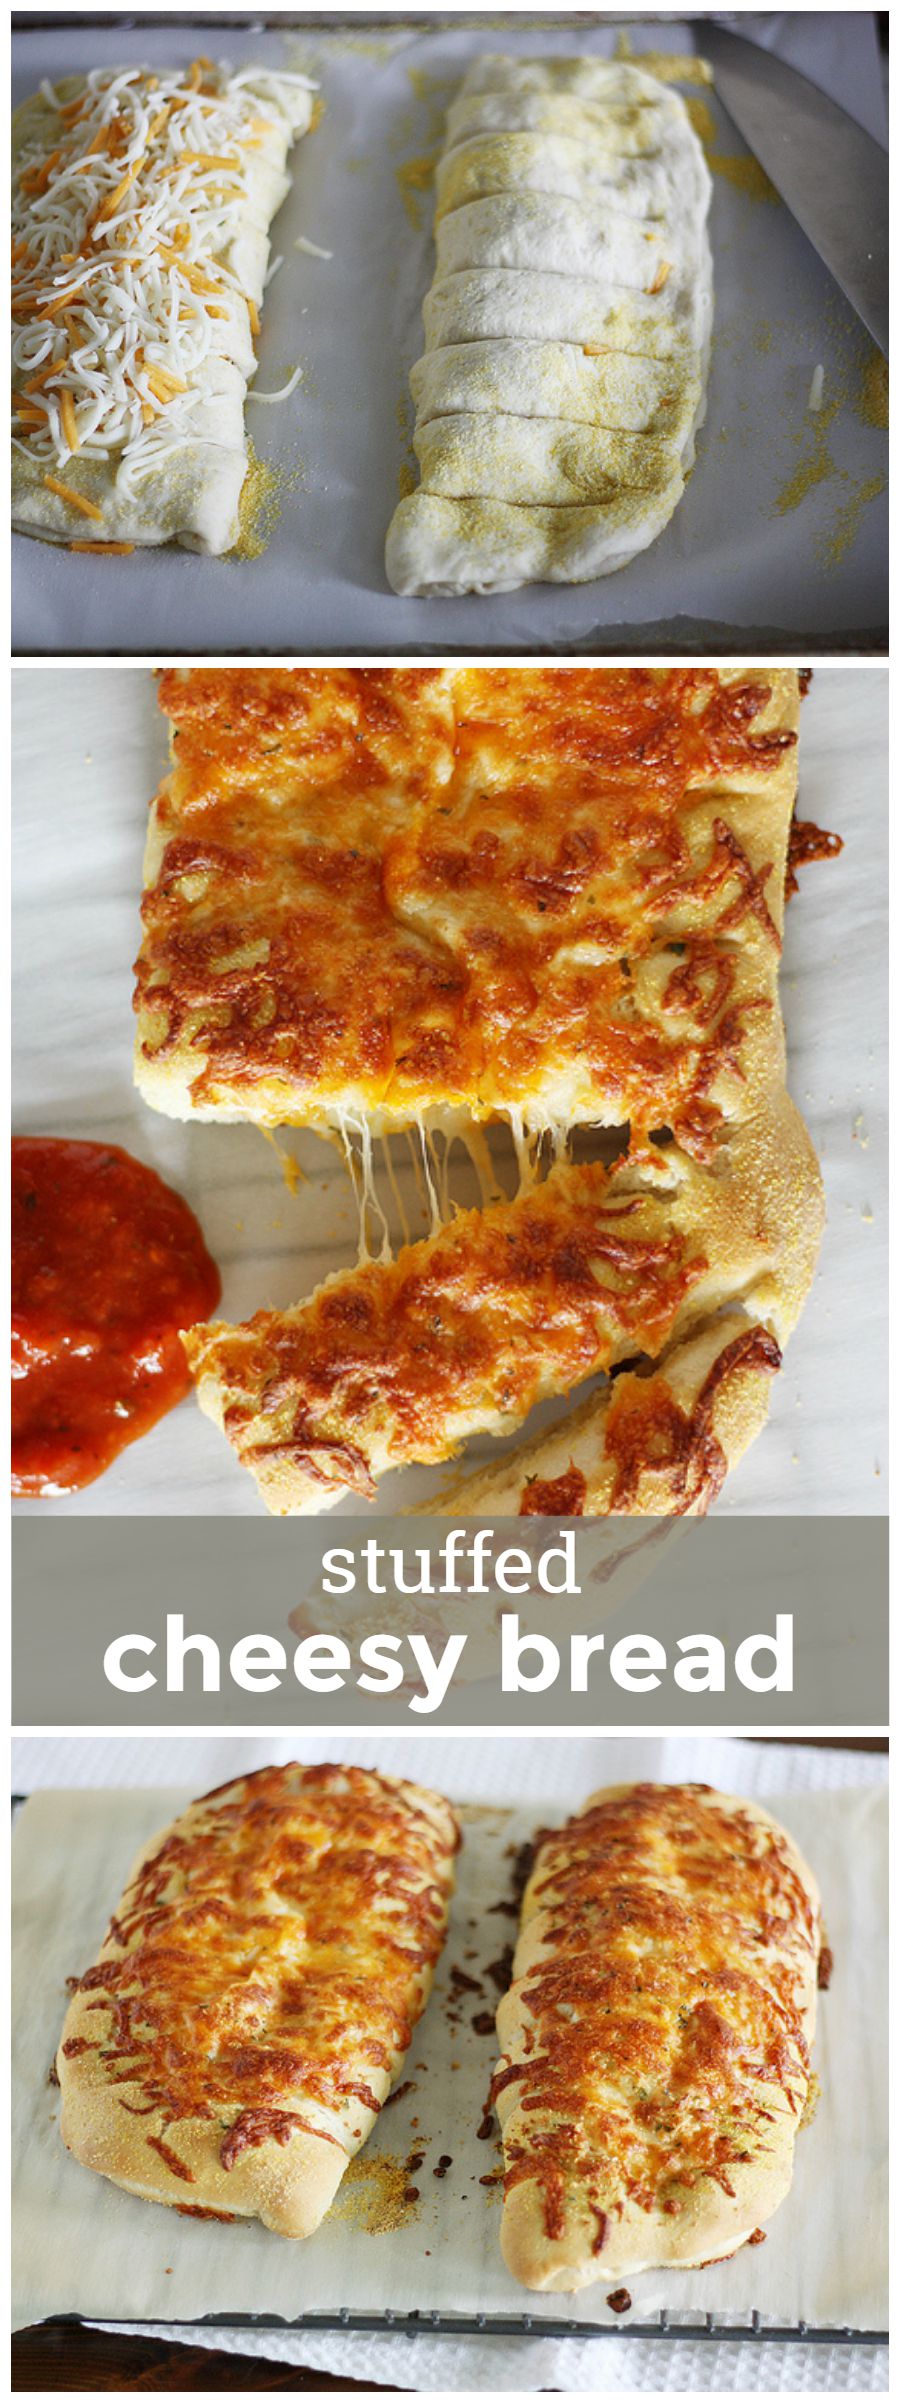 Stuffed Cheesy Bread -- You won't believe how easy it is to make this delicious melty cheese-stuffed bread! girlversusdough.com @girlversusdough